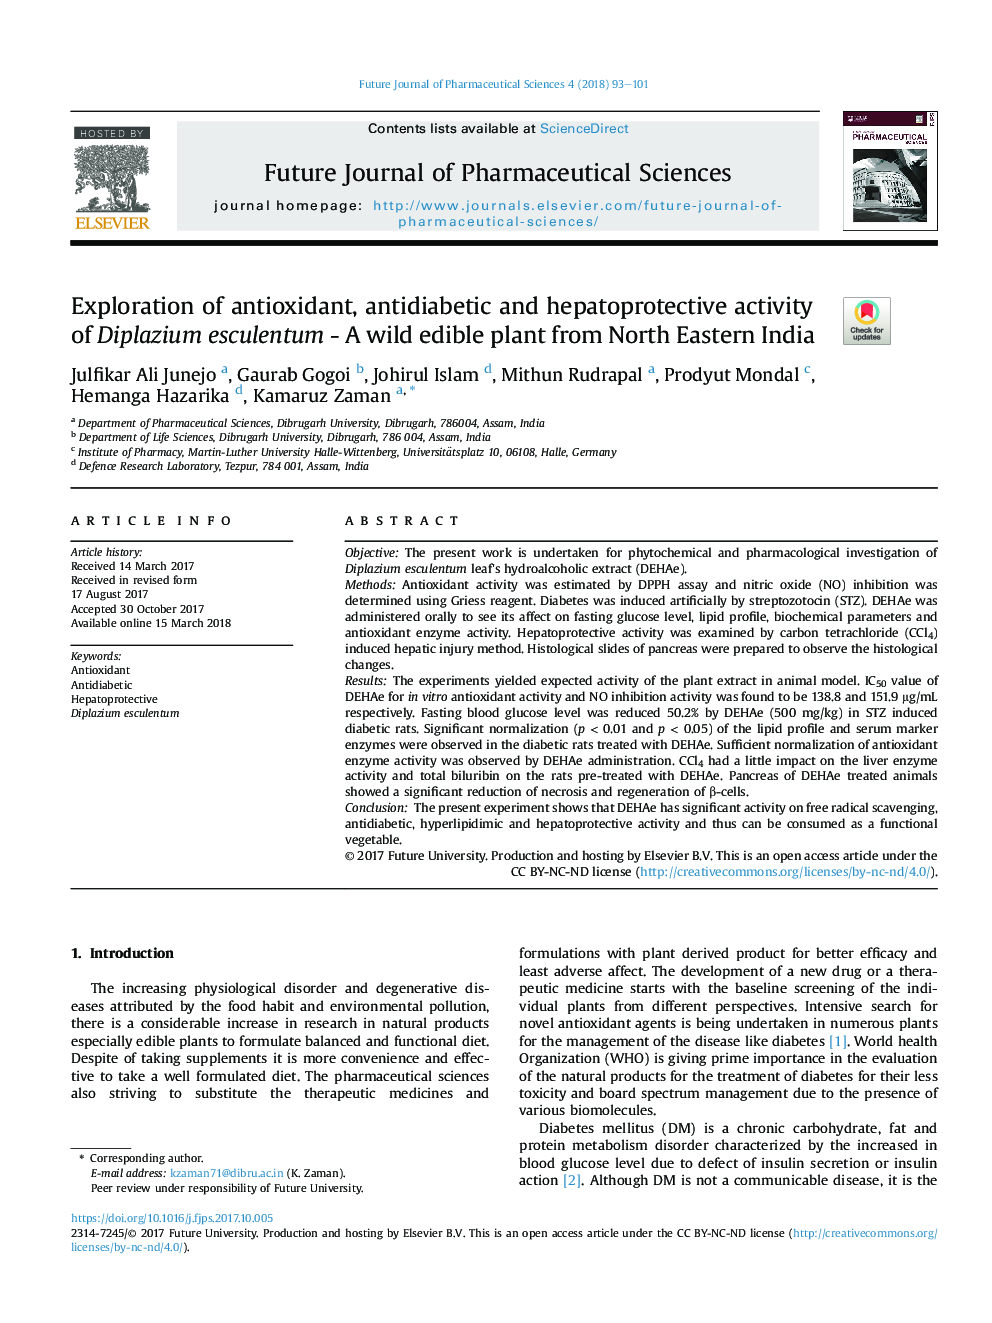 Exploration of antioxidant, antidiabetic and hepatoprotective activity of Diplazium esculentum - A wild edible plant from North Eastern India